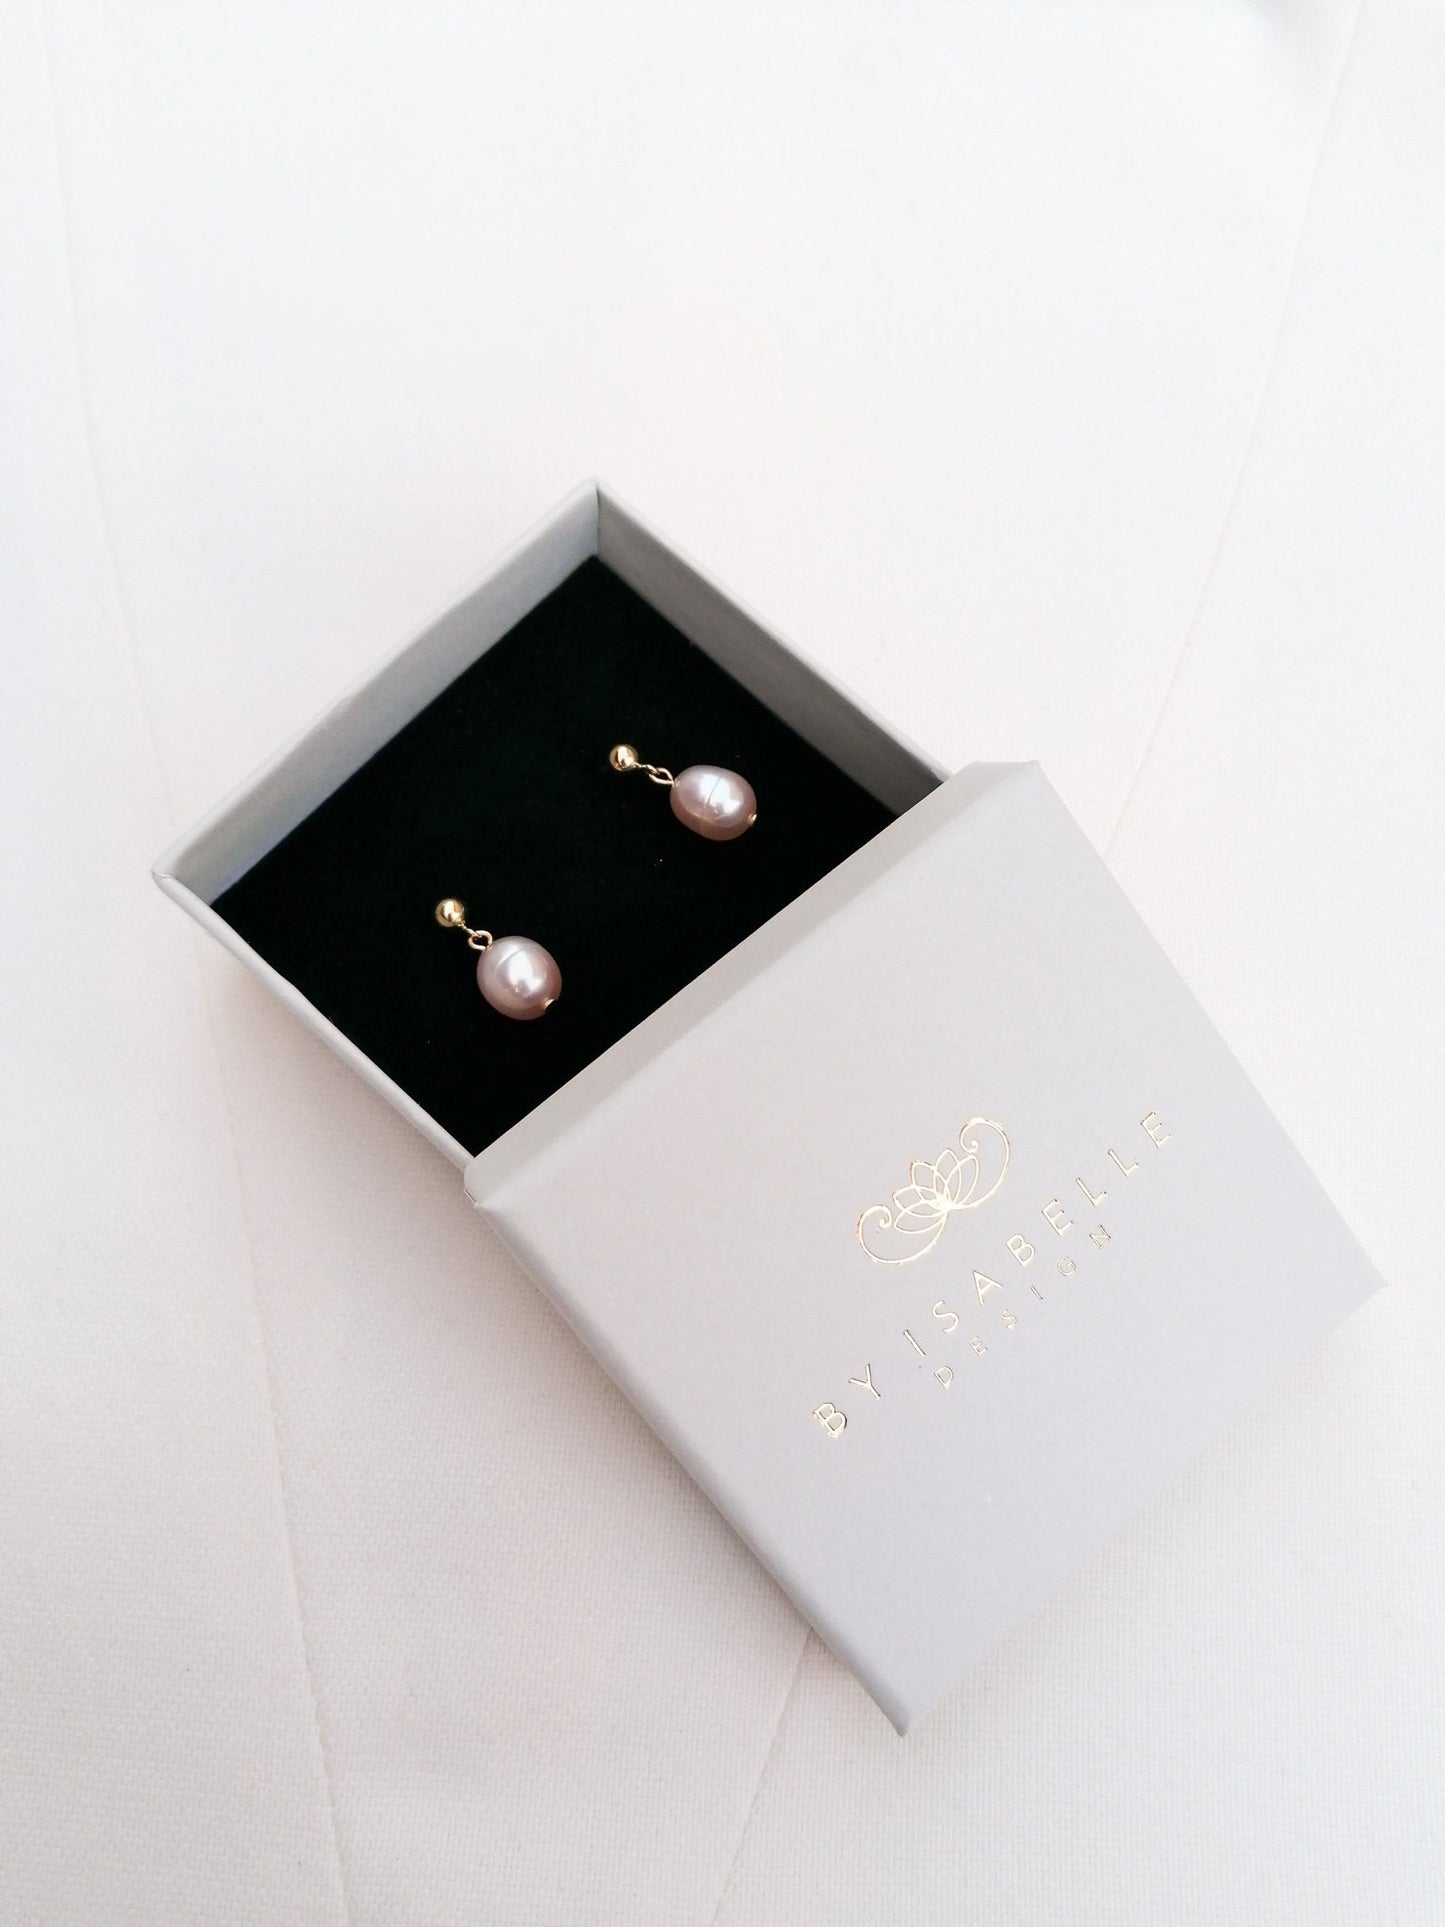 Pink pearl earrings - gold filled